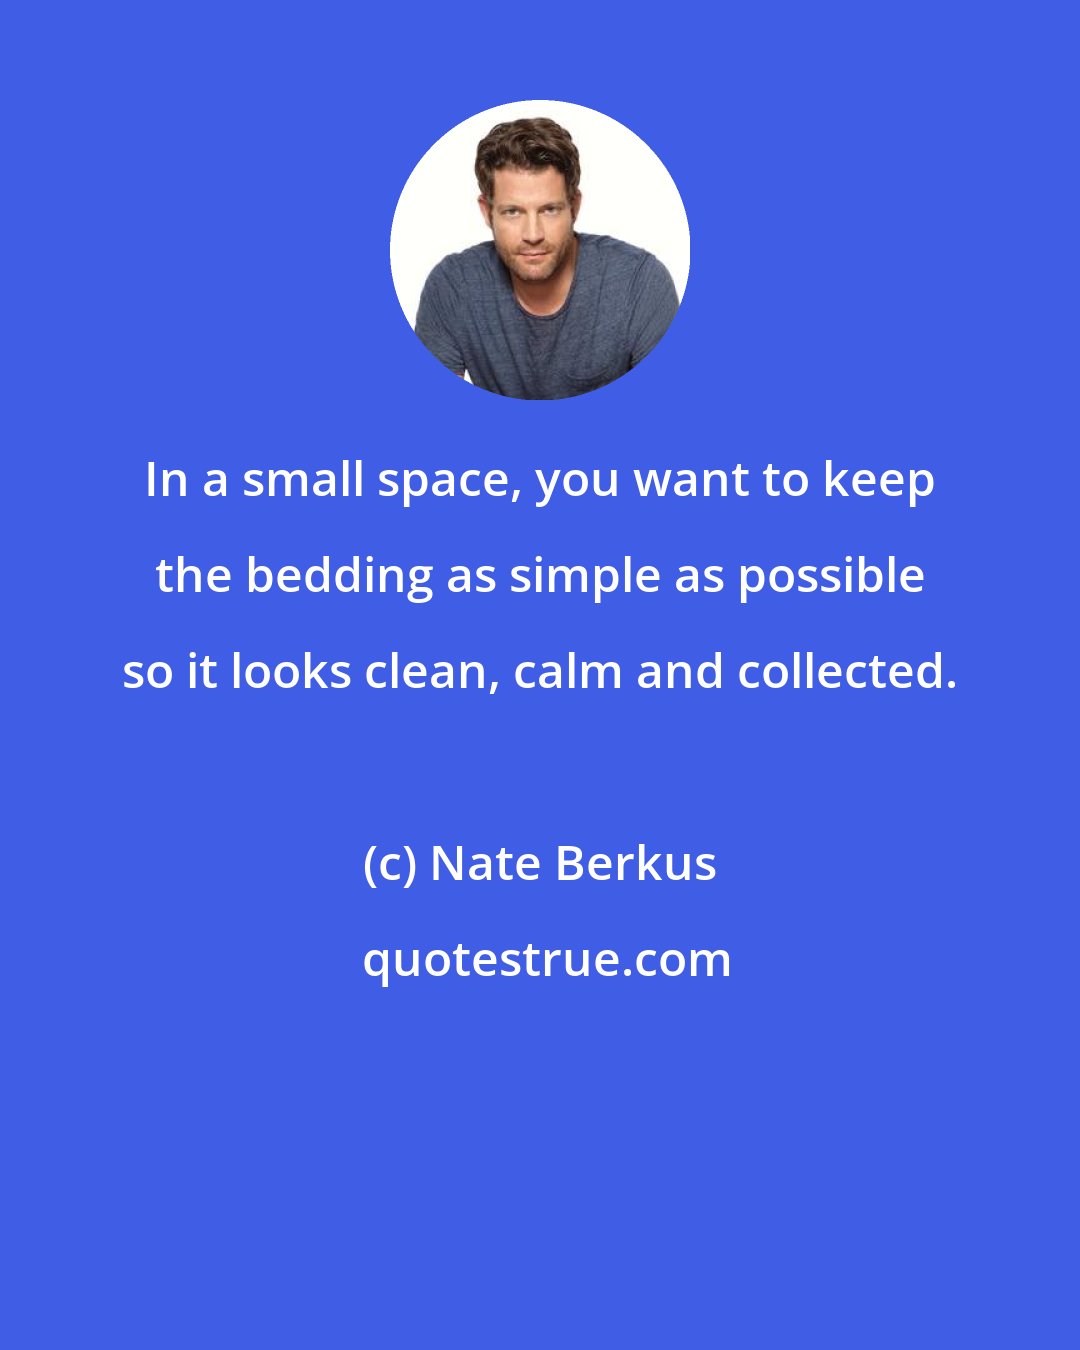 Nate Berkus: In a small space, you want to keep the bedding as simple as possible so it looks clean, calm and collected.